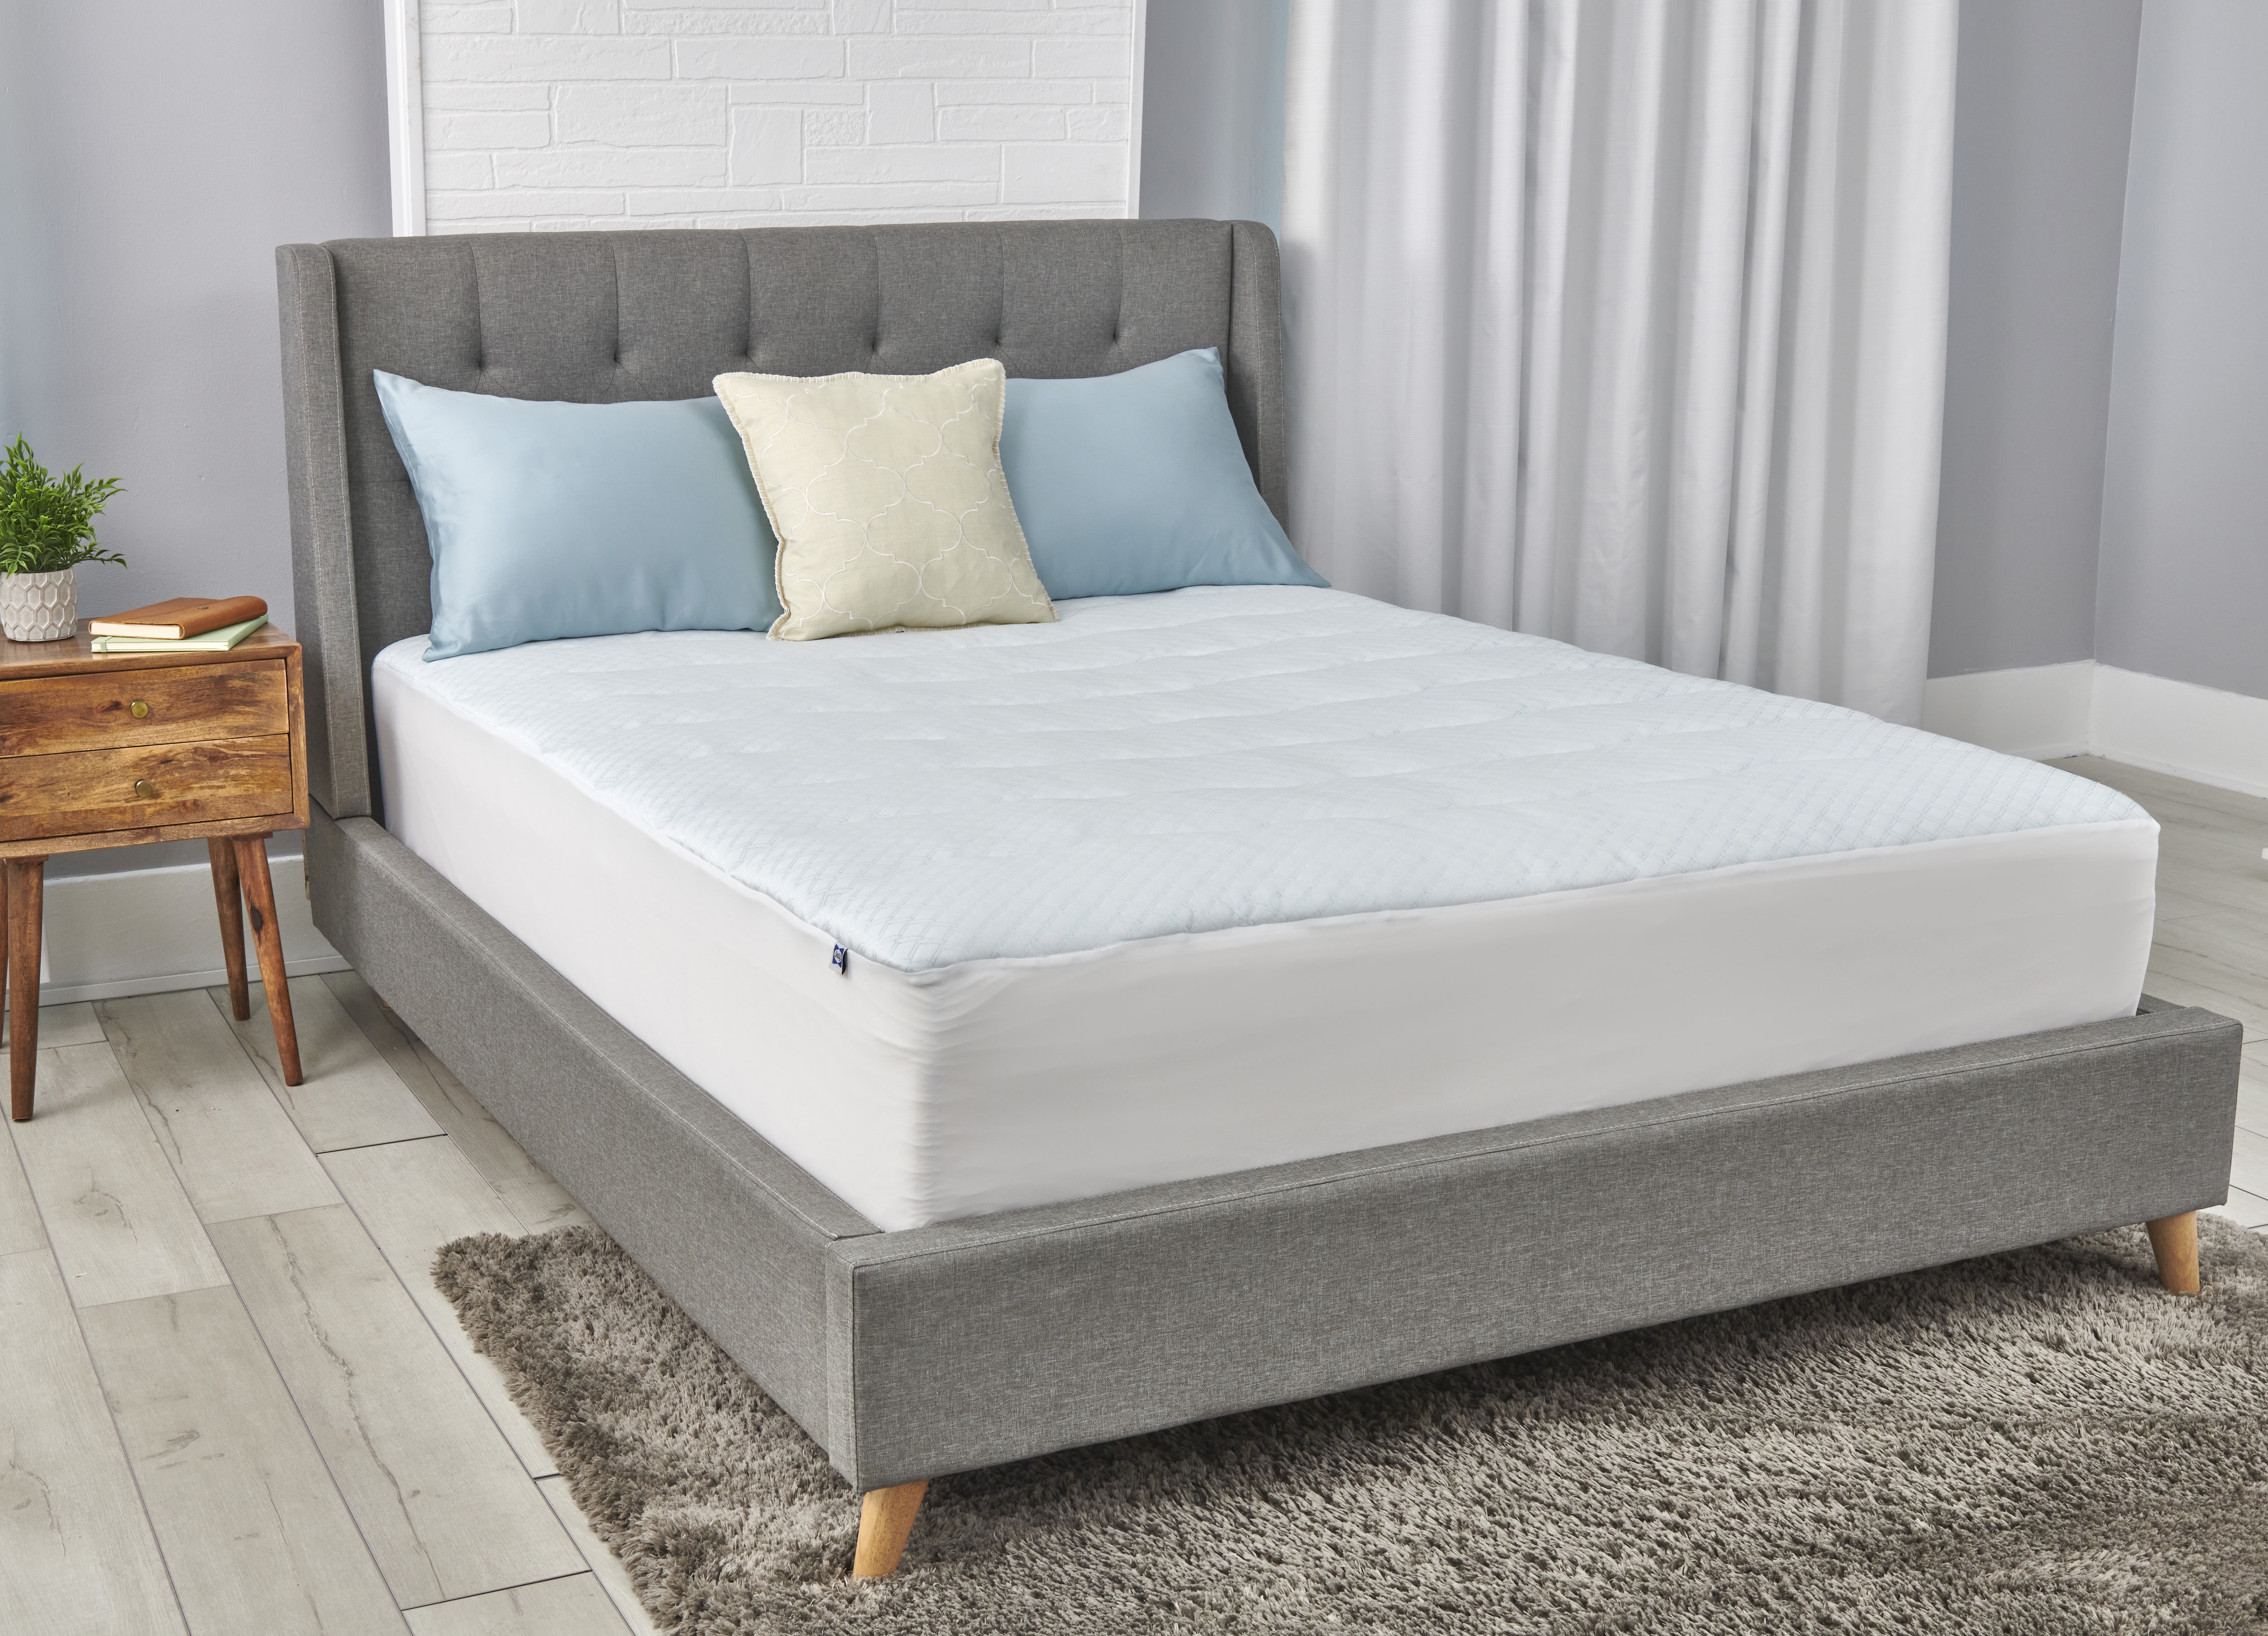 cooling mattress pad with elastic sides